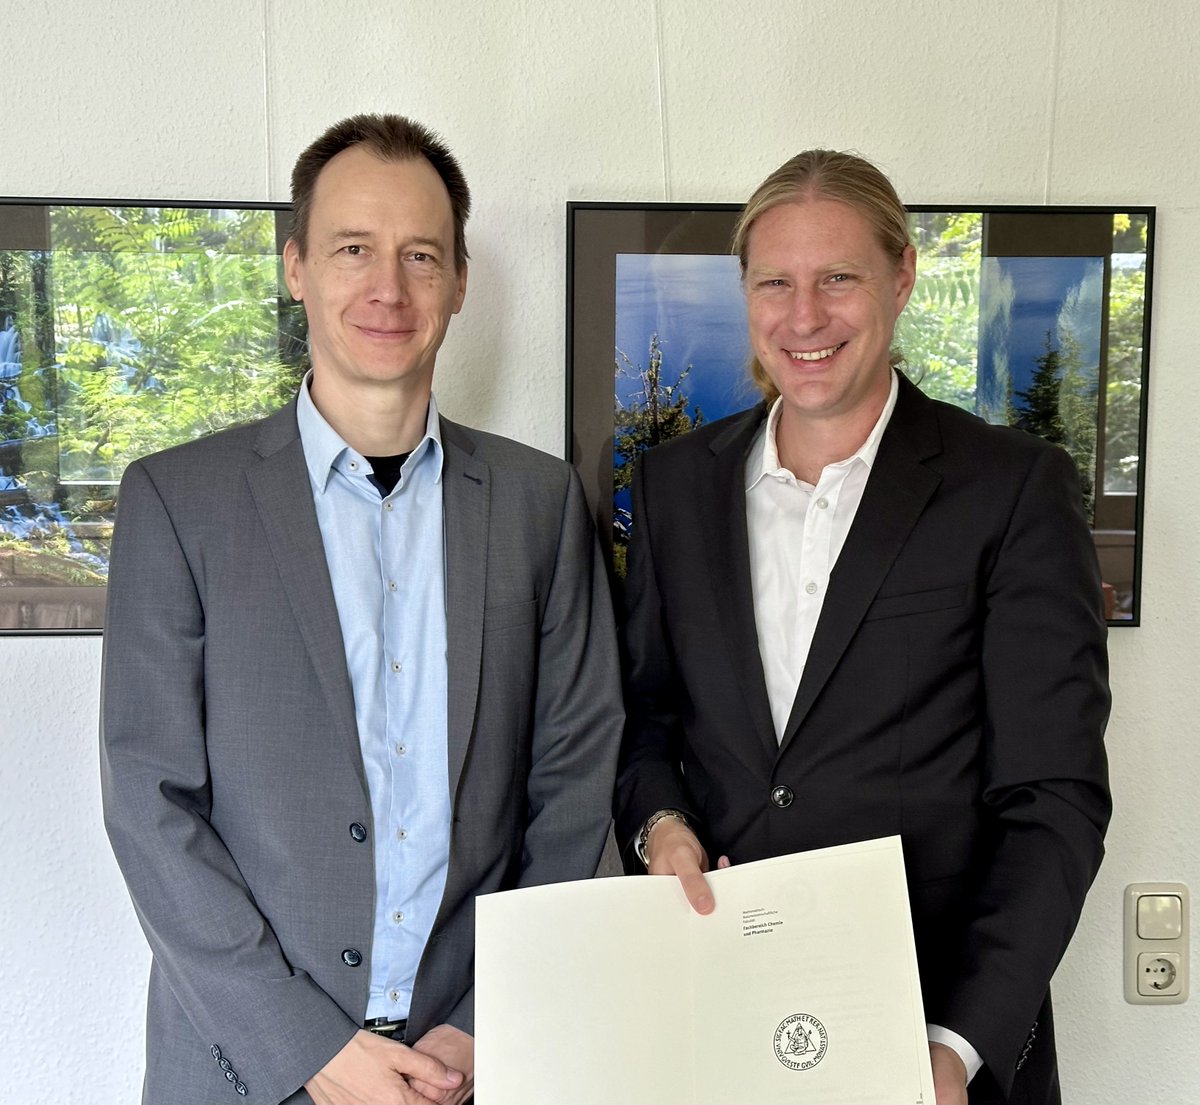 Last week, I formally completed my #habilitation at the department for organic chemistry of @uni_muenster. Many thanks to vice dean Henning Mootz for administering the oath to me! Huge thanks also go to @GloriusFrank @GloriusGroup for mentoring me between 2016 and 2022!